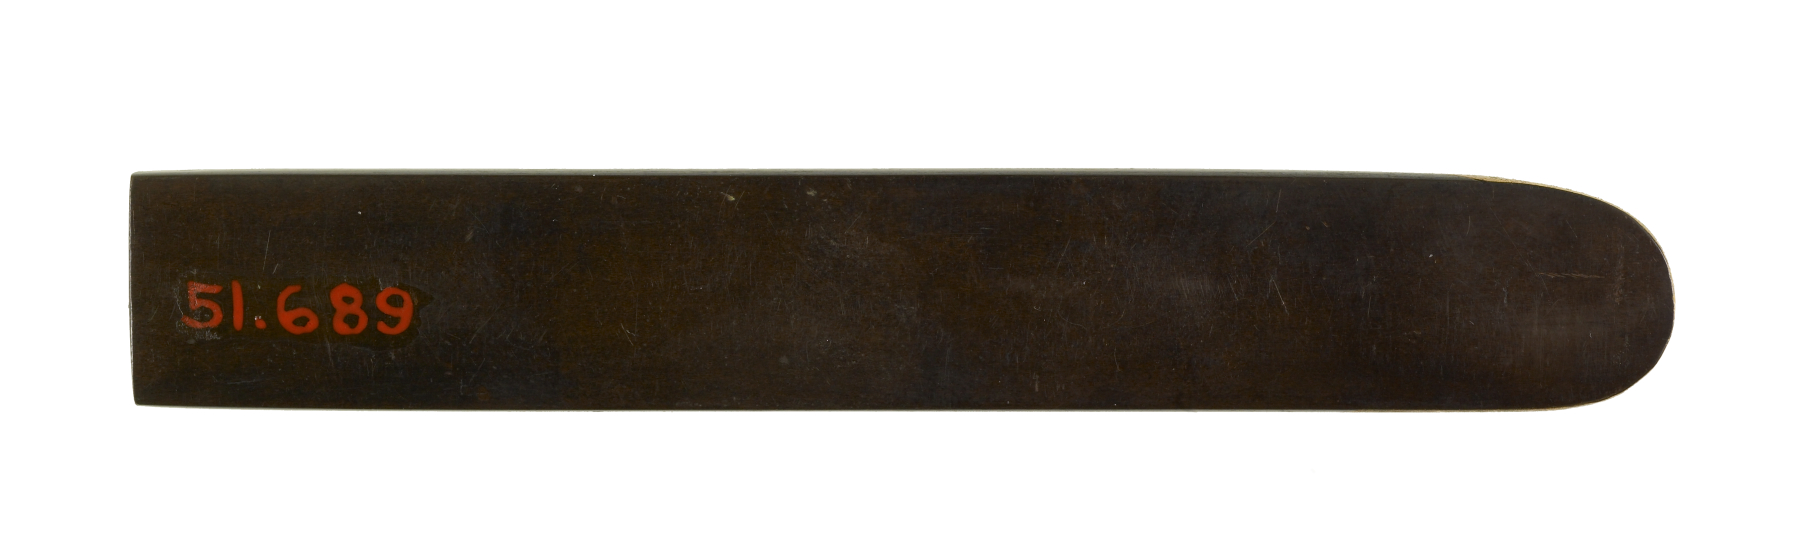 Image for Kozuka with New Year's Decorations